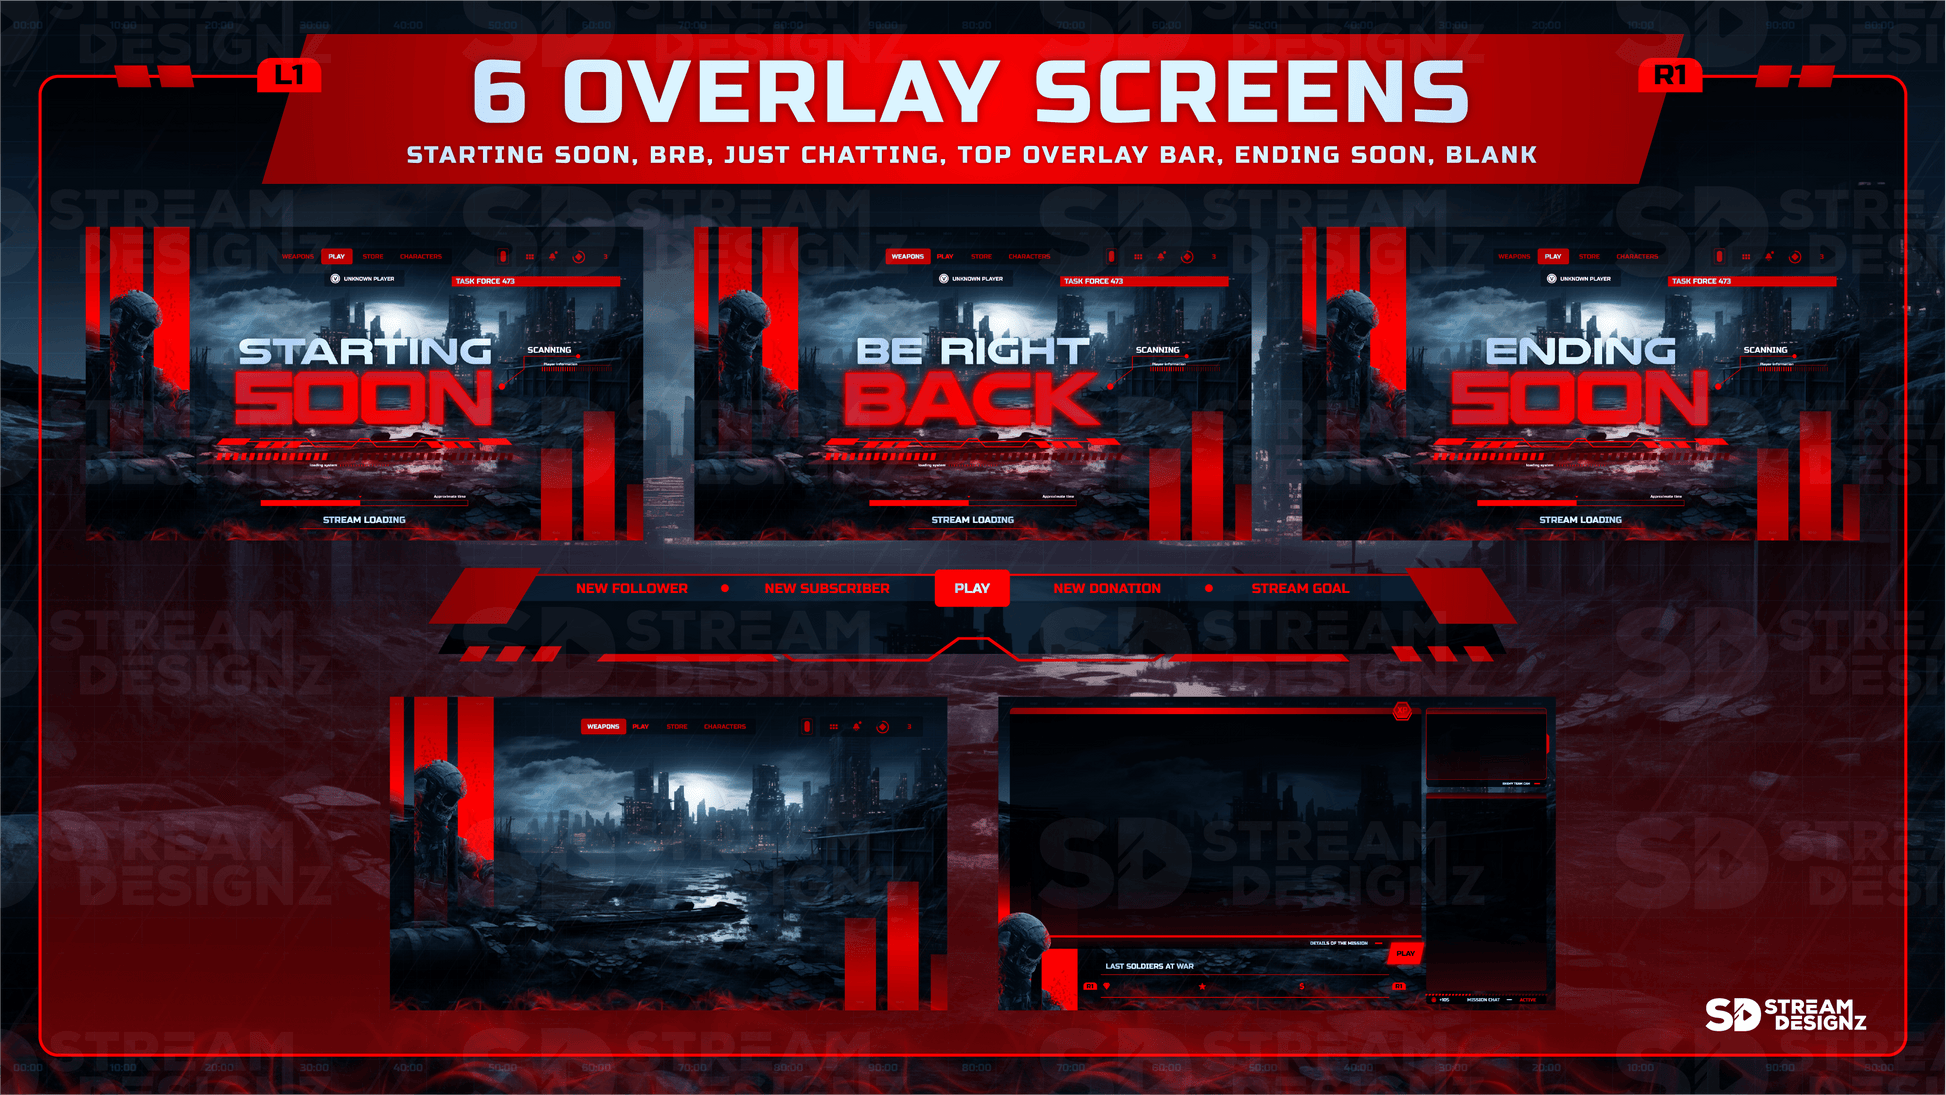 Ultimate stream package 6 overlay screens loadout stream designz